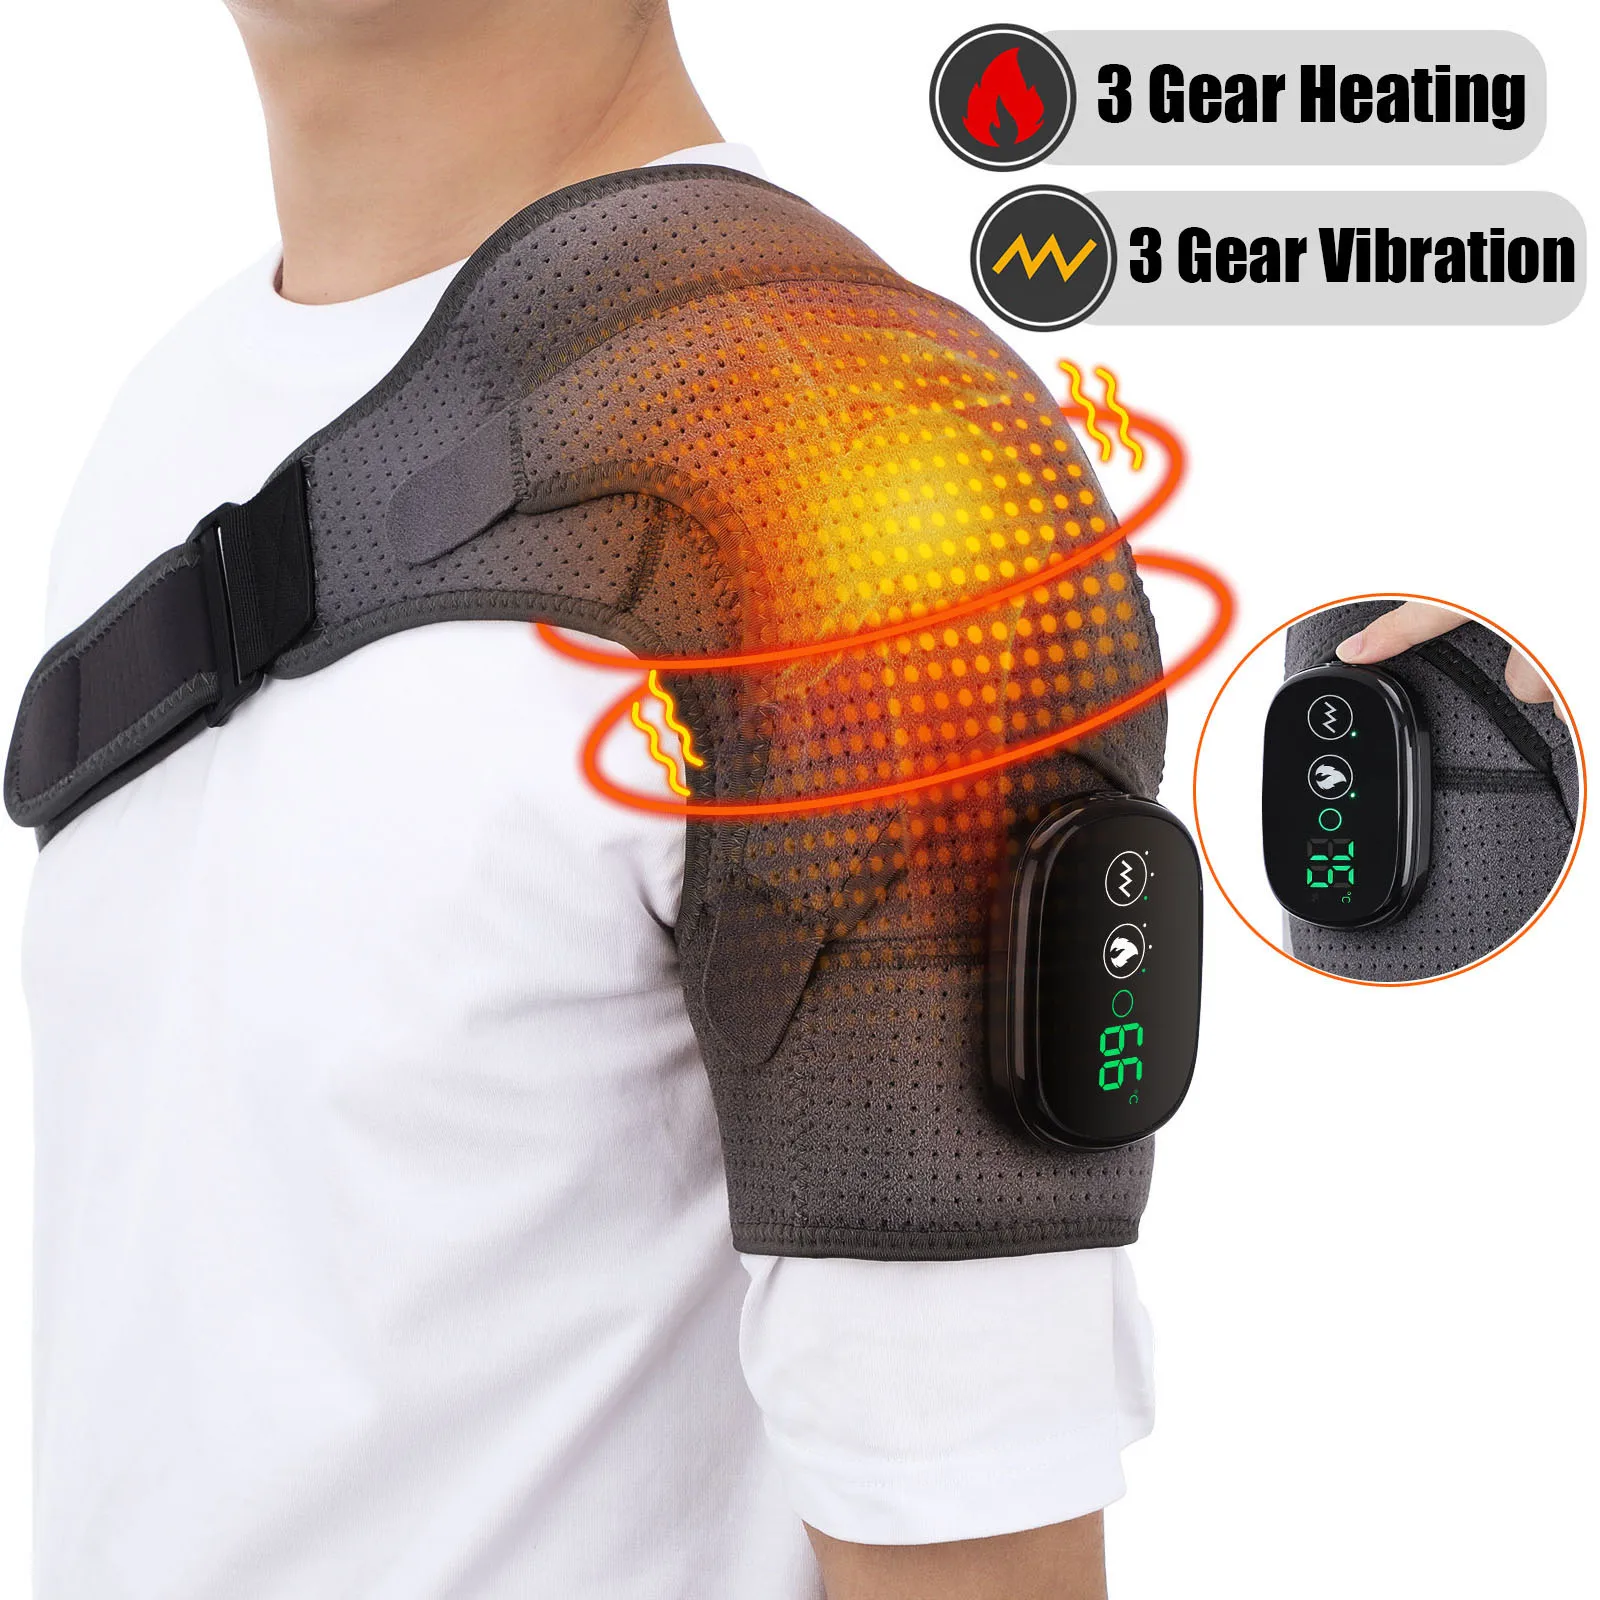 

Electric Heating Shoulder Massager Vibration Massage Knee Pad Brace Support Belt Joint Arthritis Pain Relief Physiotherapy